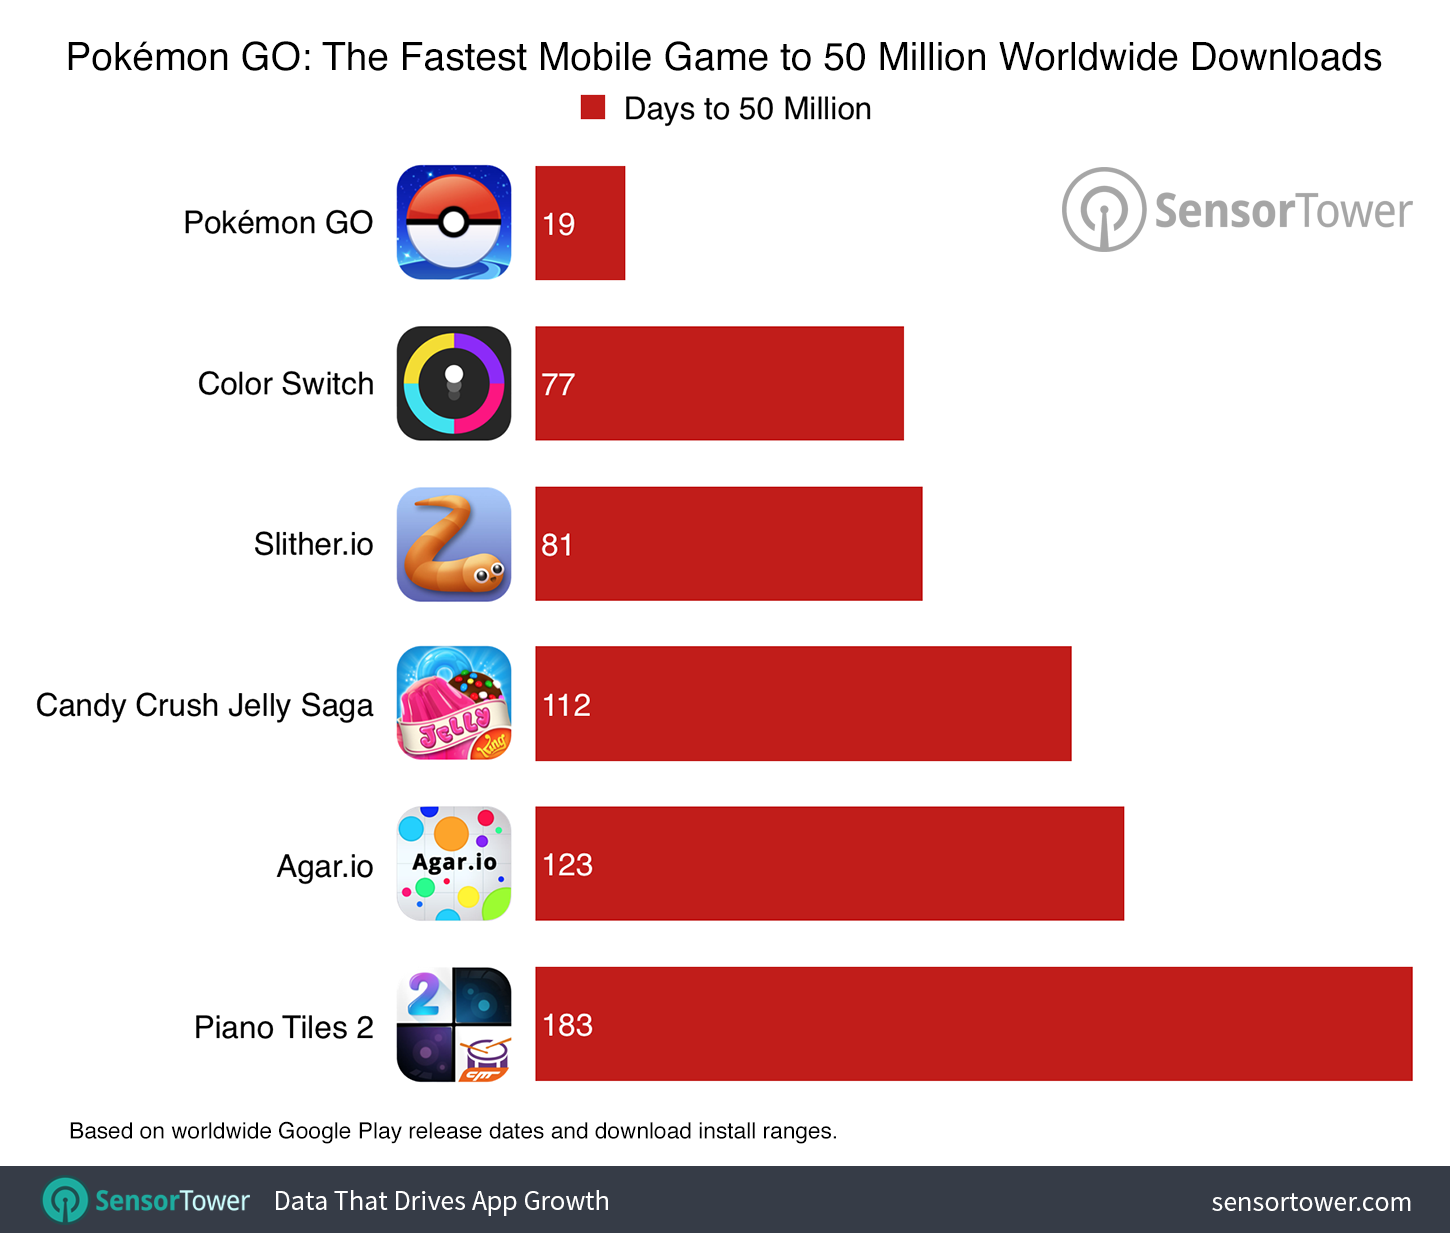 Number of Days It Took Pokemon GO to Reach 50 Million Worldwide Downloads Compared to Other Top Mobile Games